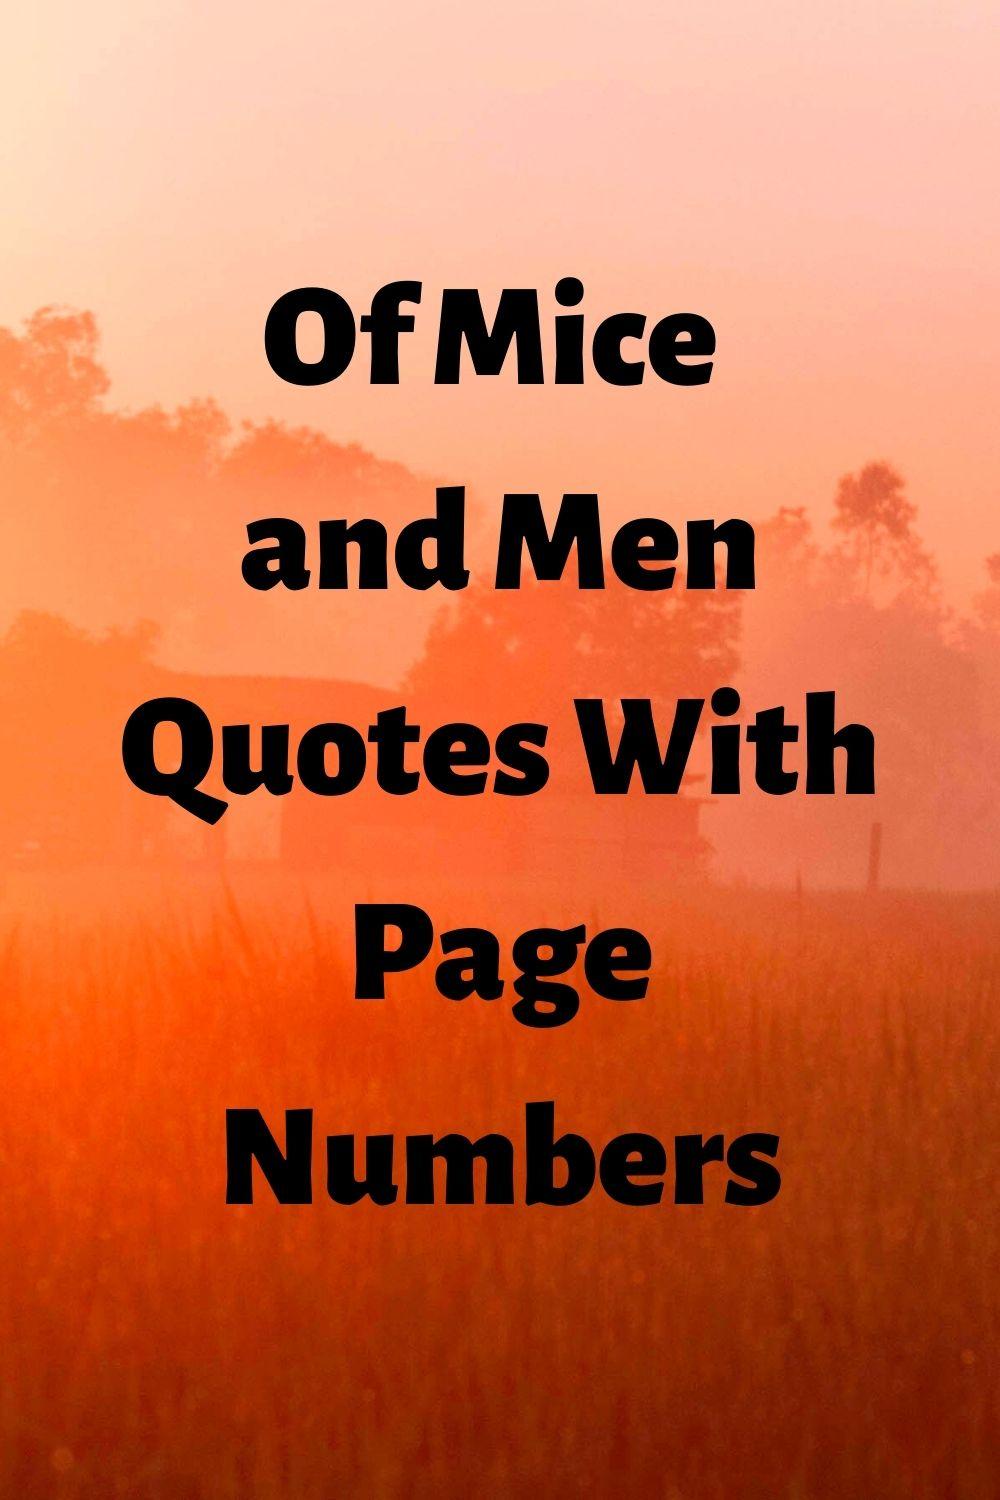 crooks of mice and men quotes